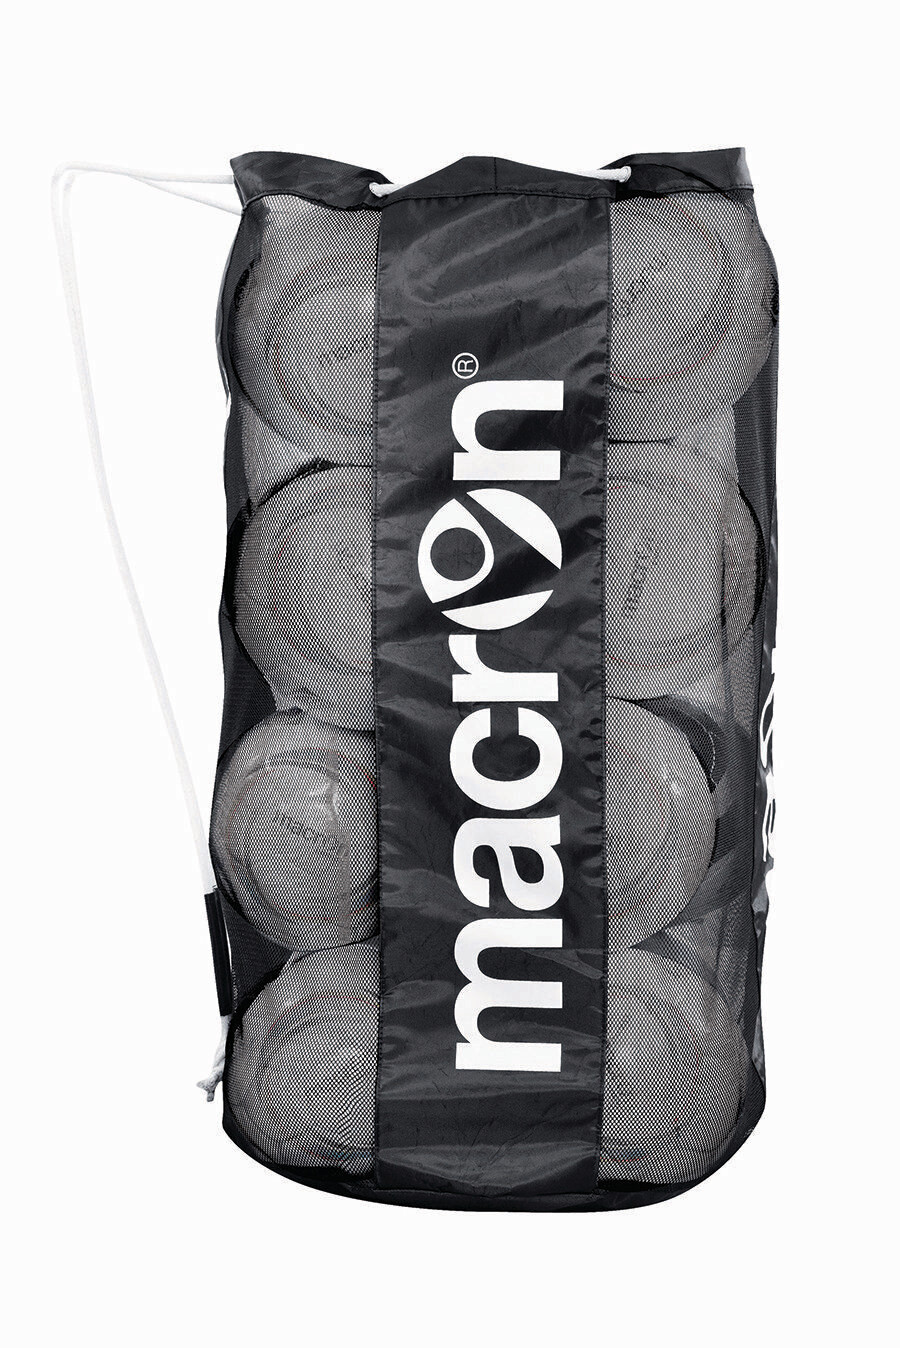 Heavy Duty Ball Bag with Rope Pull Cord Strap